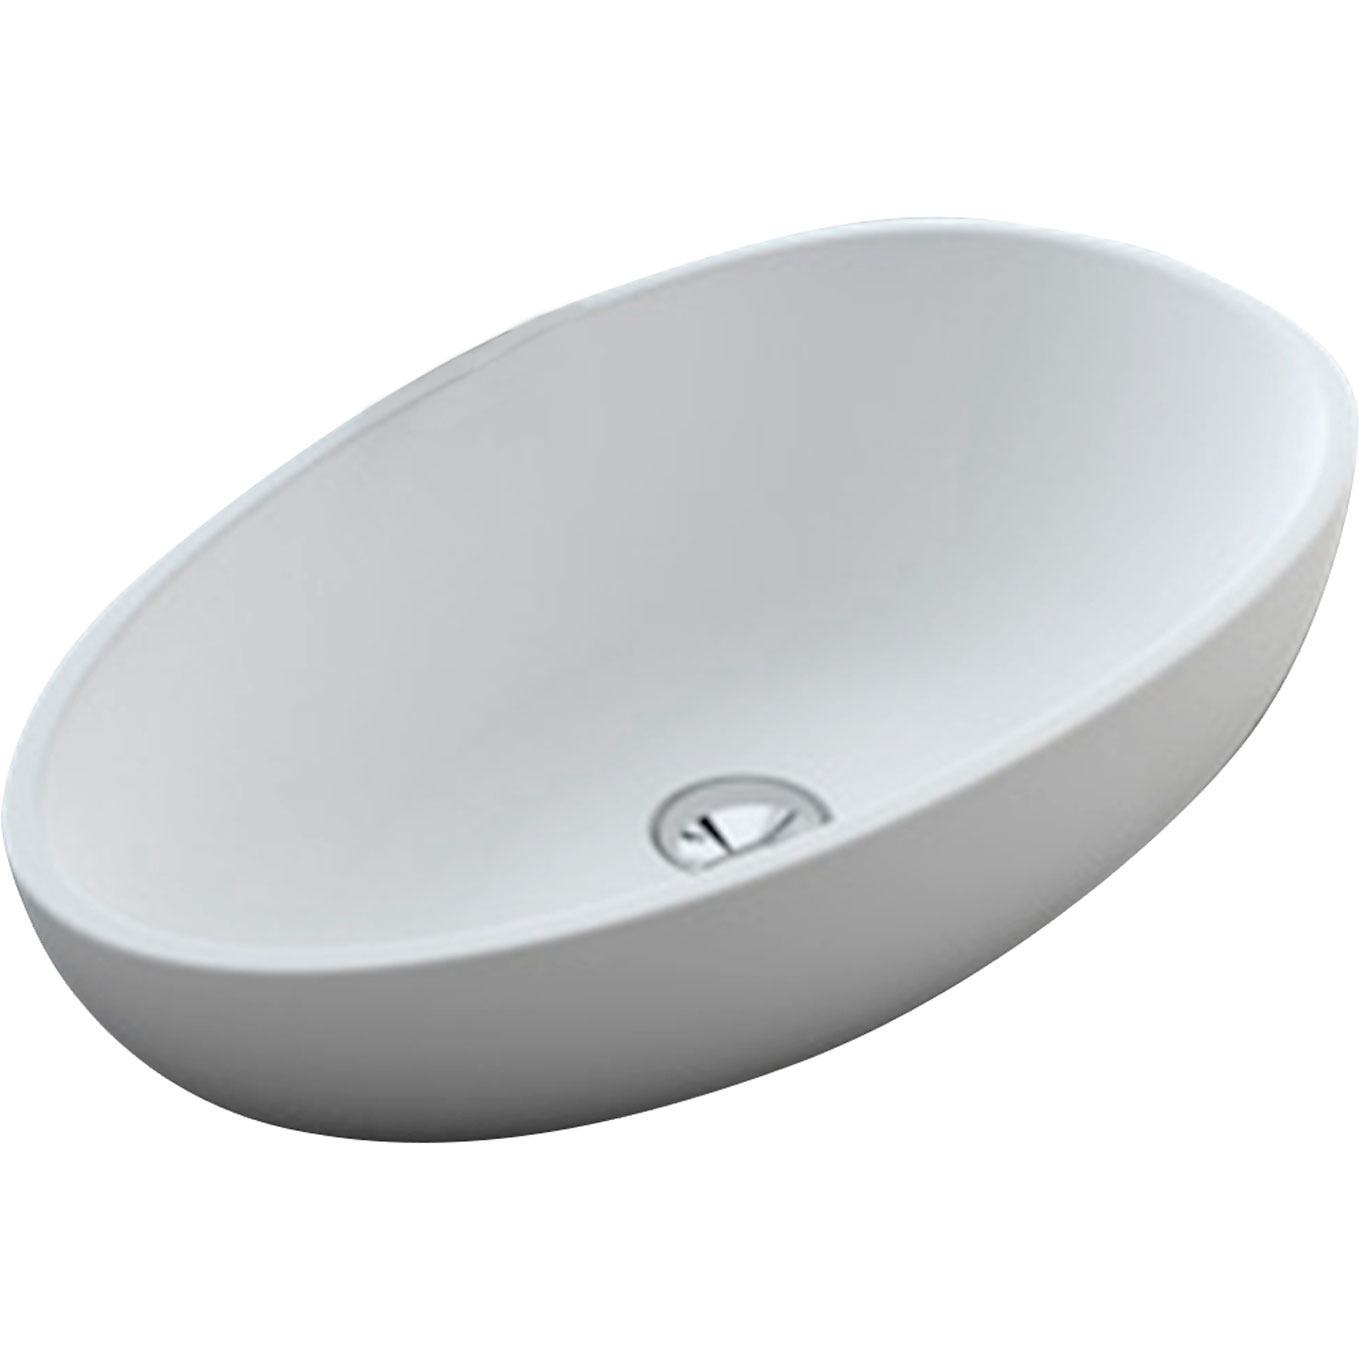 FIENZA CSB61 BAHAMA MKII SOLID SURFACE OVAL ABOVE COUNTER BASIN MATTE WHITE